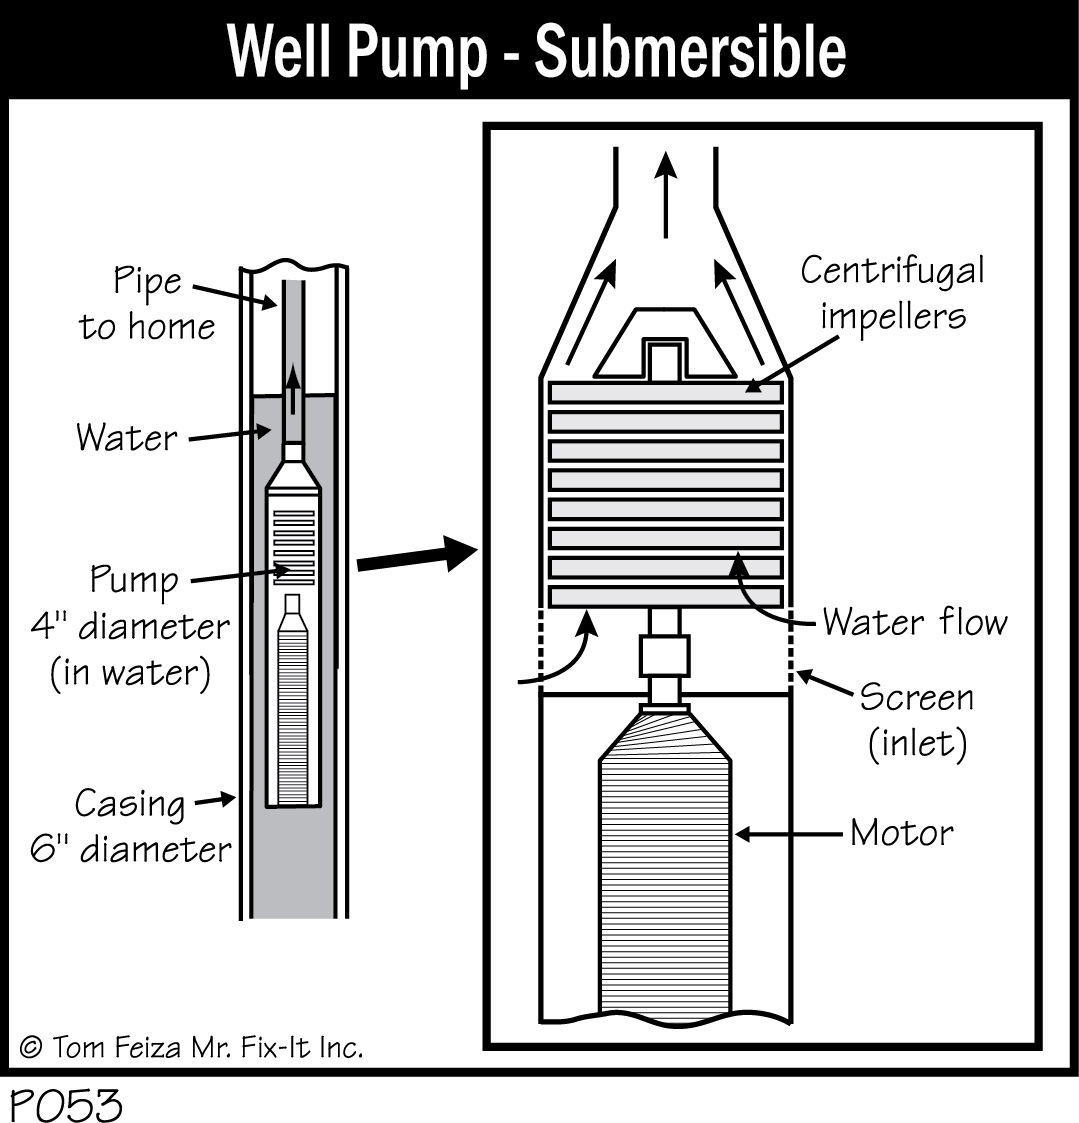 P053 - Well Pump - Submersible